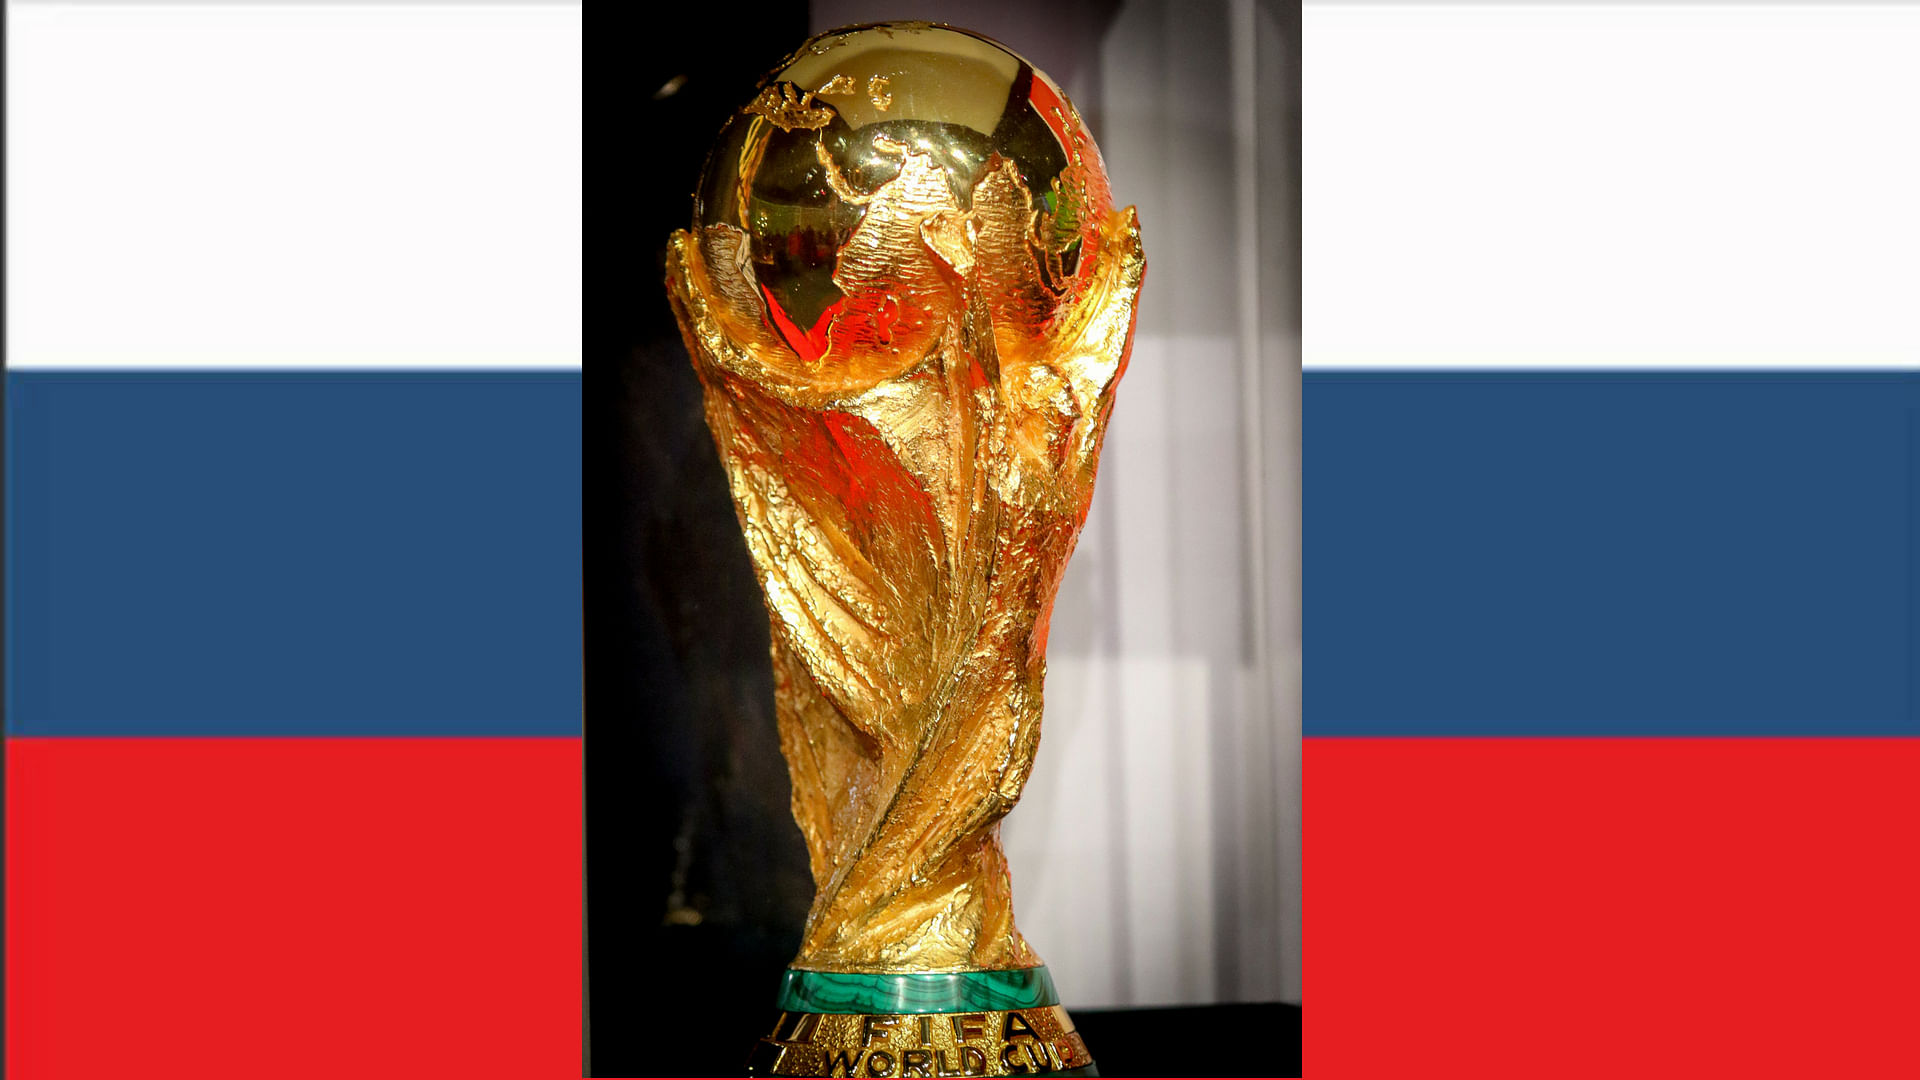 Russia will host the 21st Edition of the FIFA World Cup starting 14 June 2018